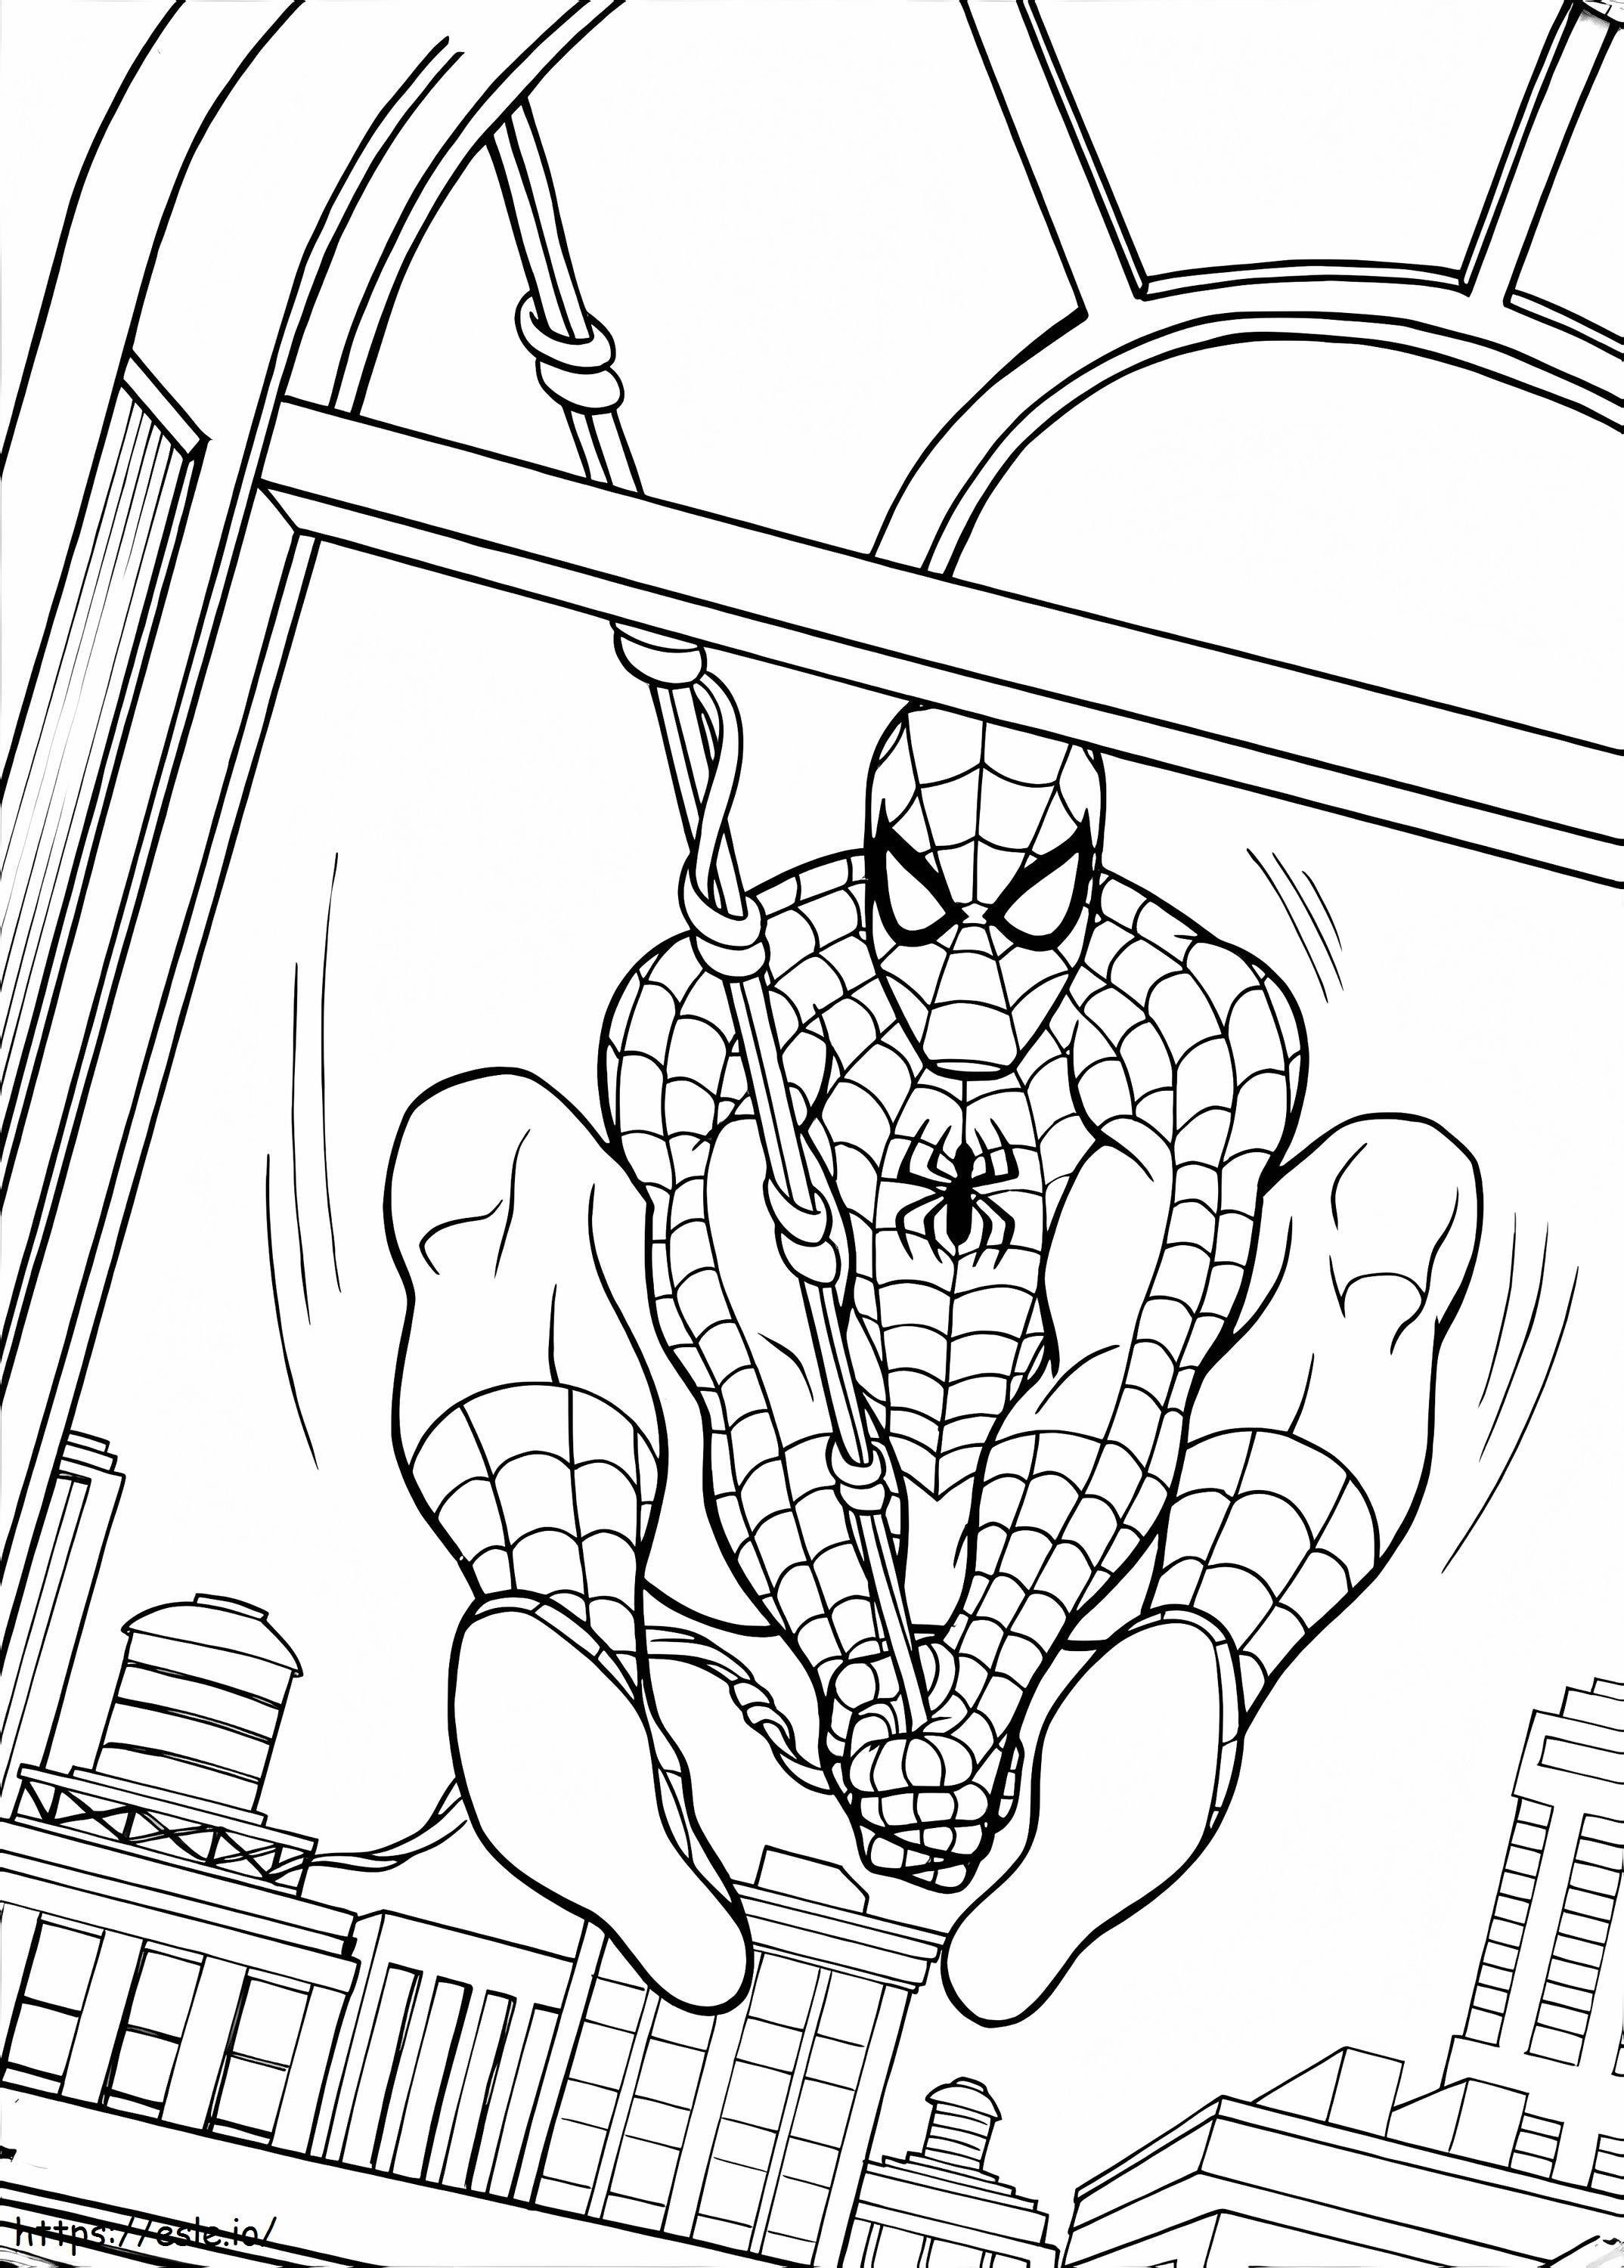 Spider Man 1 coloring page